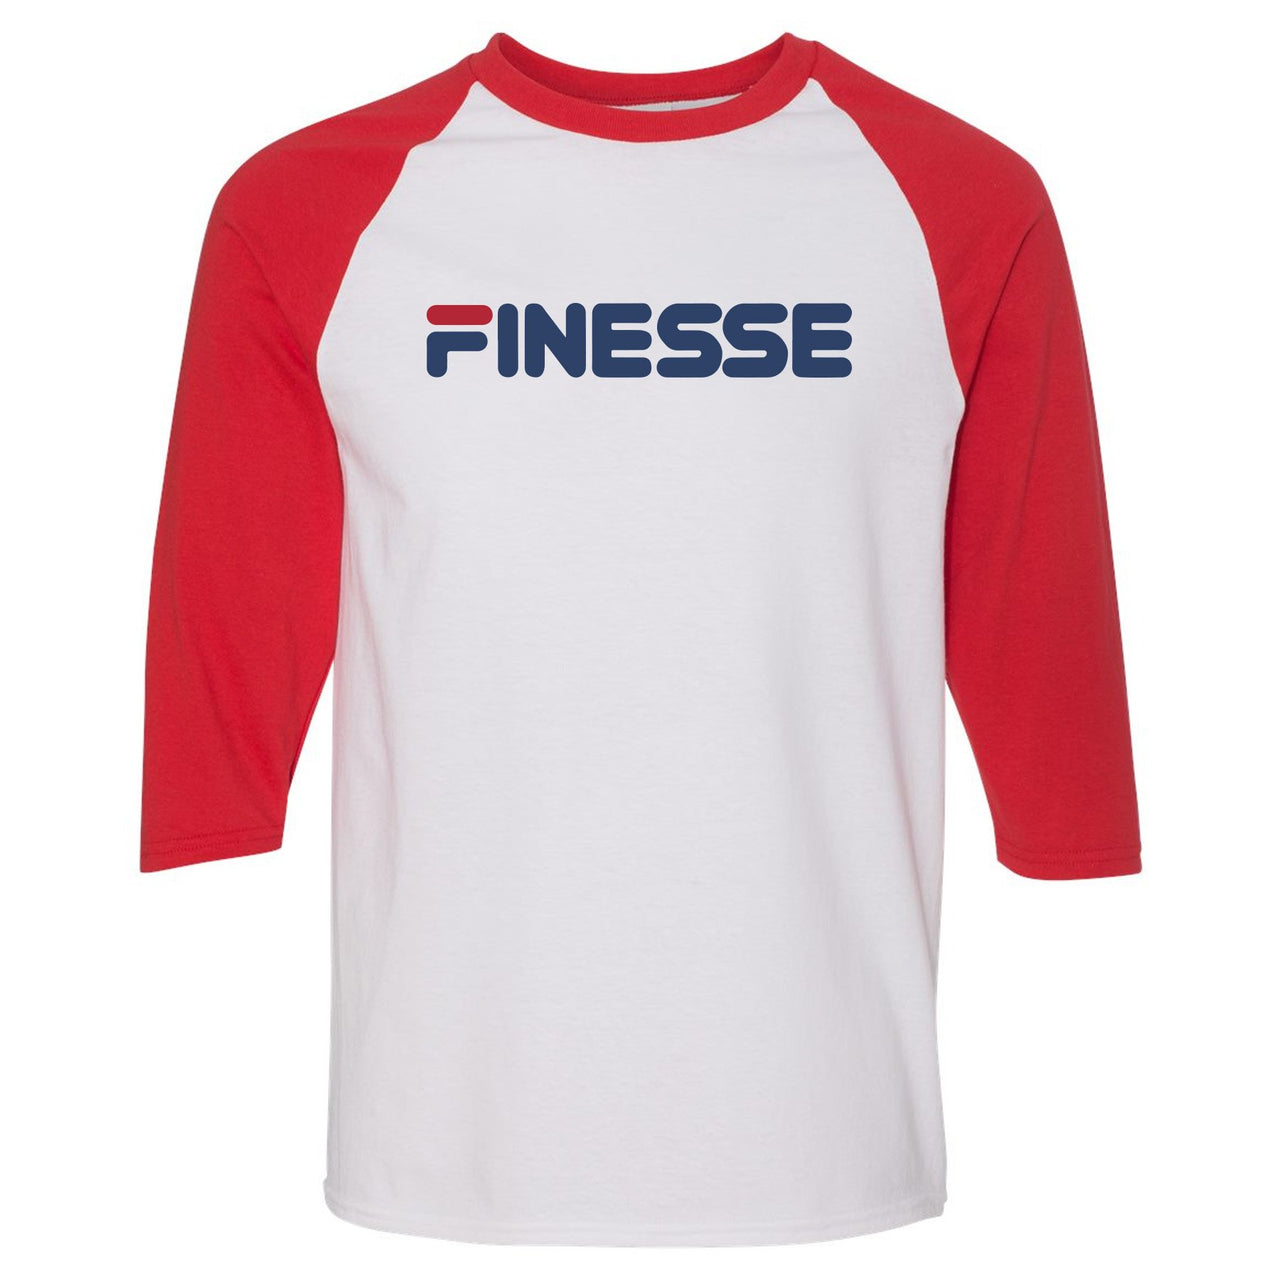 USA One Foams Raglan T Shirt | Finesse, White and Red